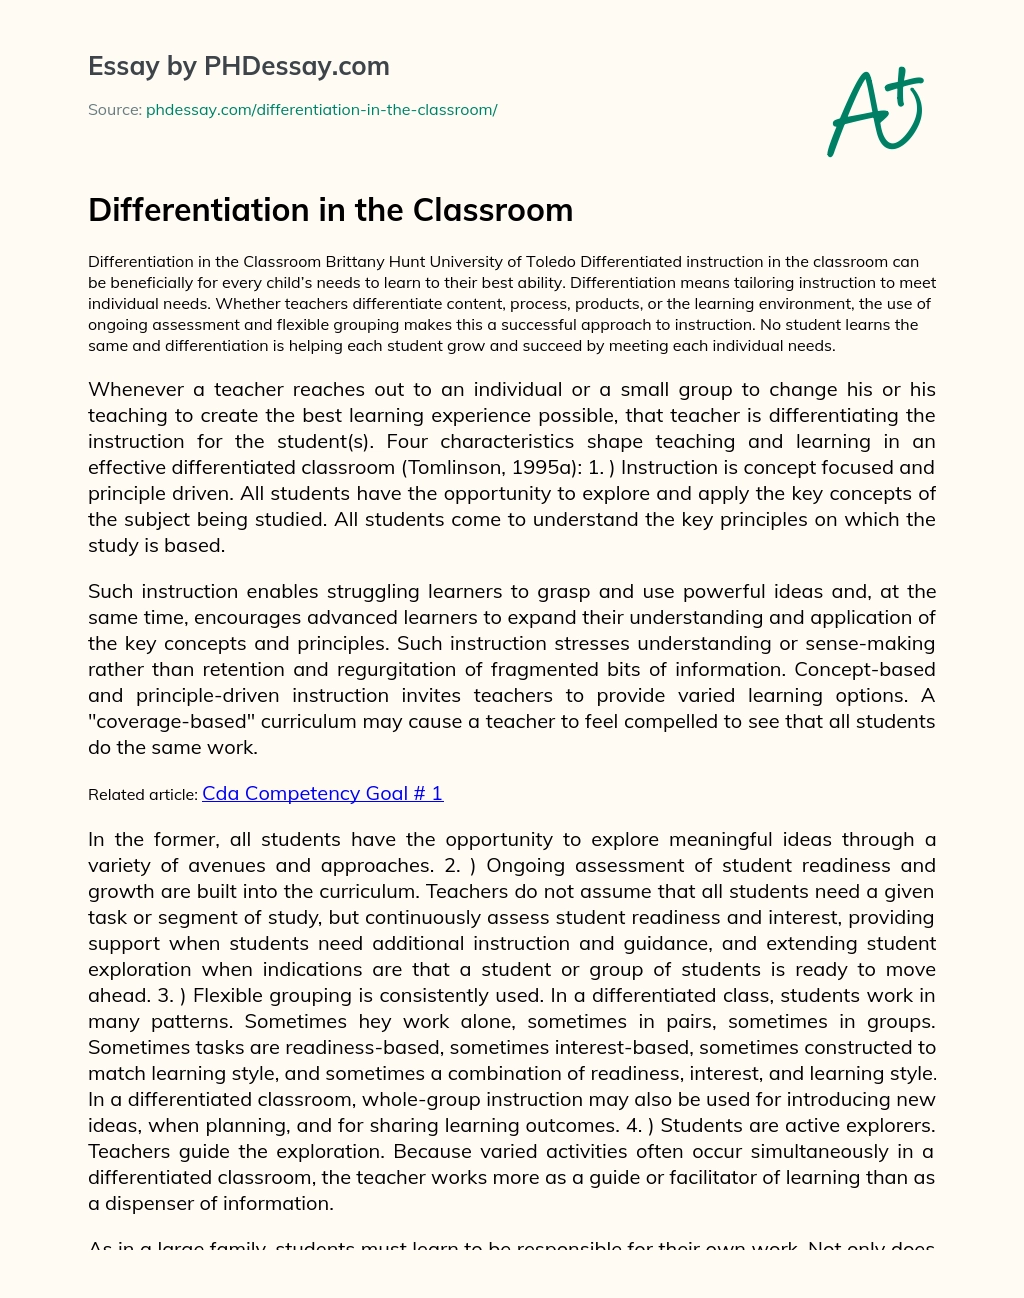 Differentiation in the Classroom essay